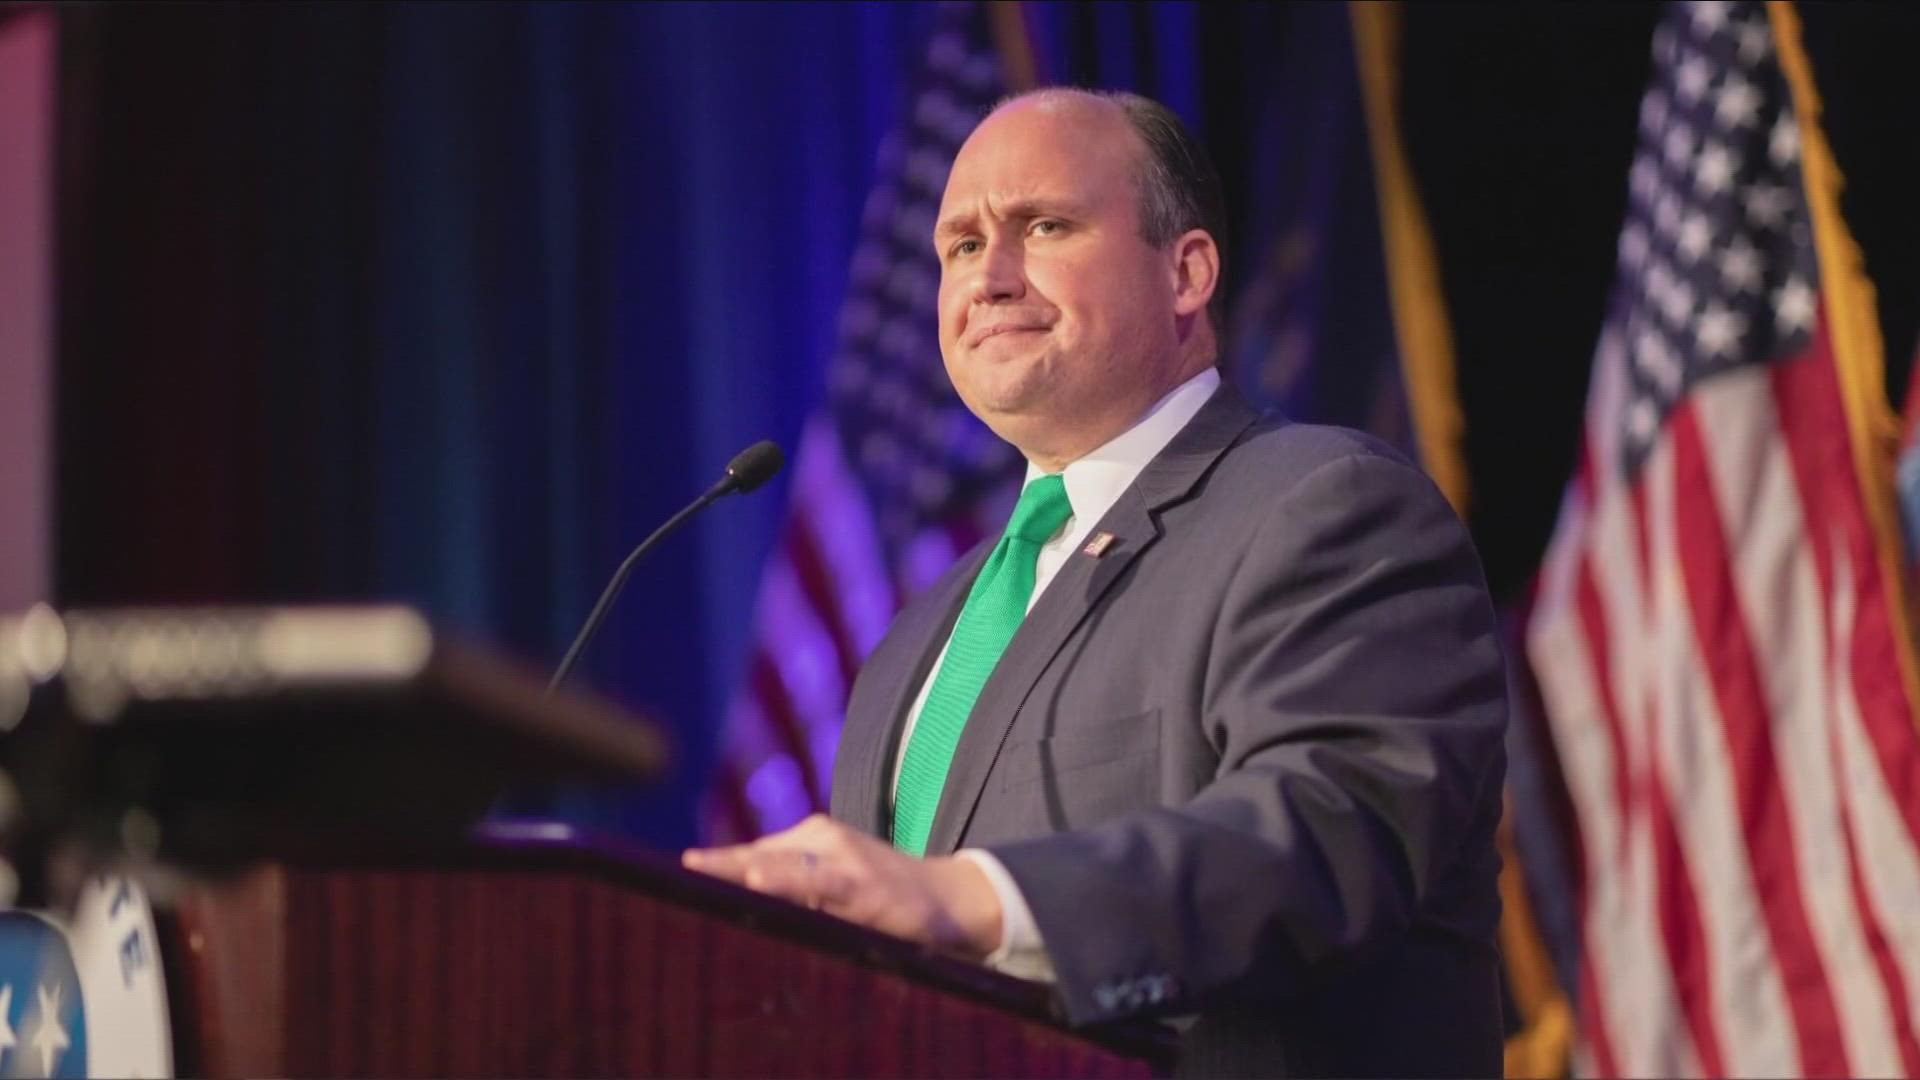 2 On Your Side sat down with NY-23 candidate Nick Langworthy for an exclusive one-on-one interview.